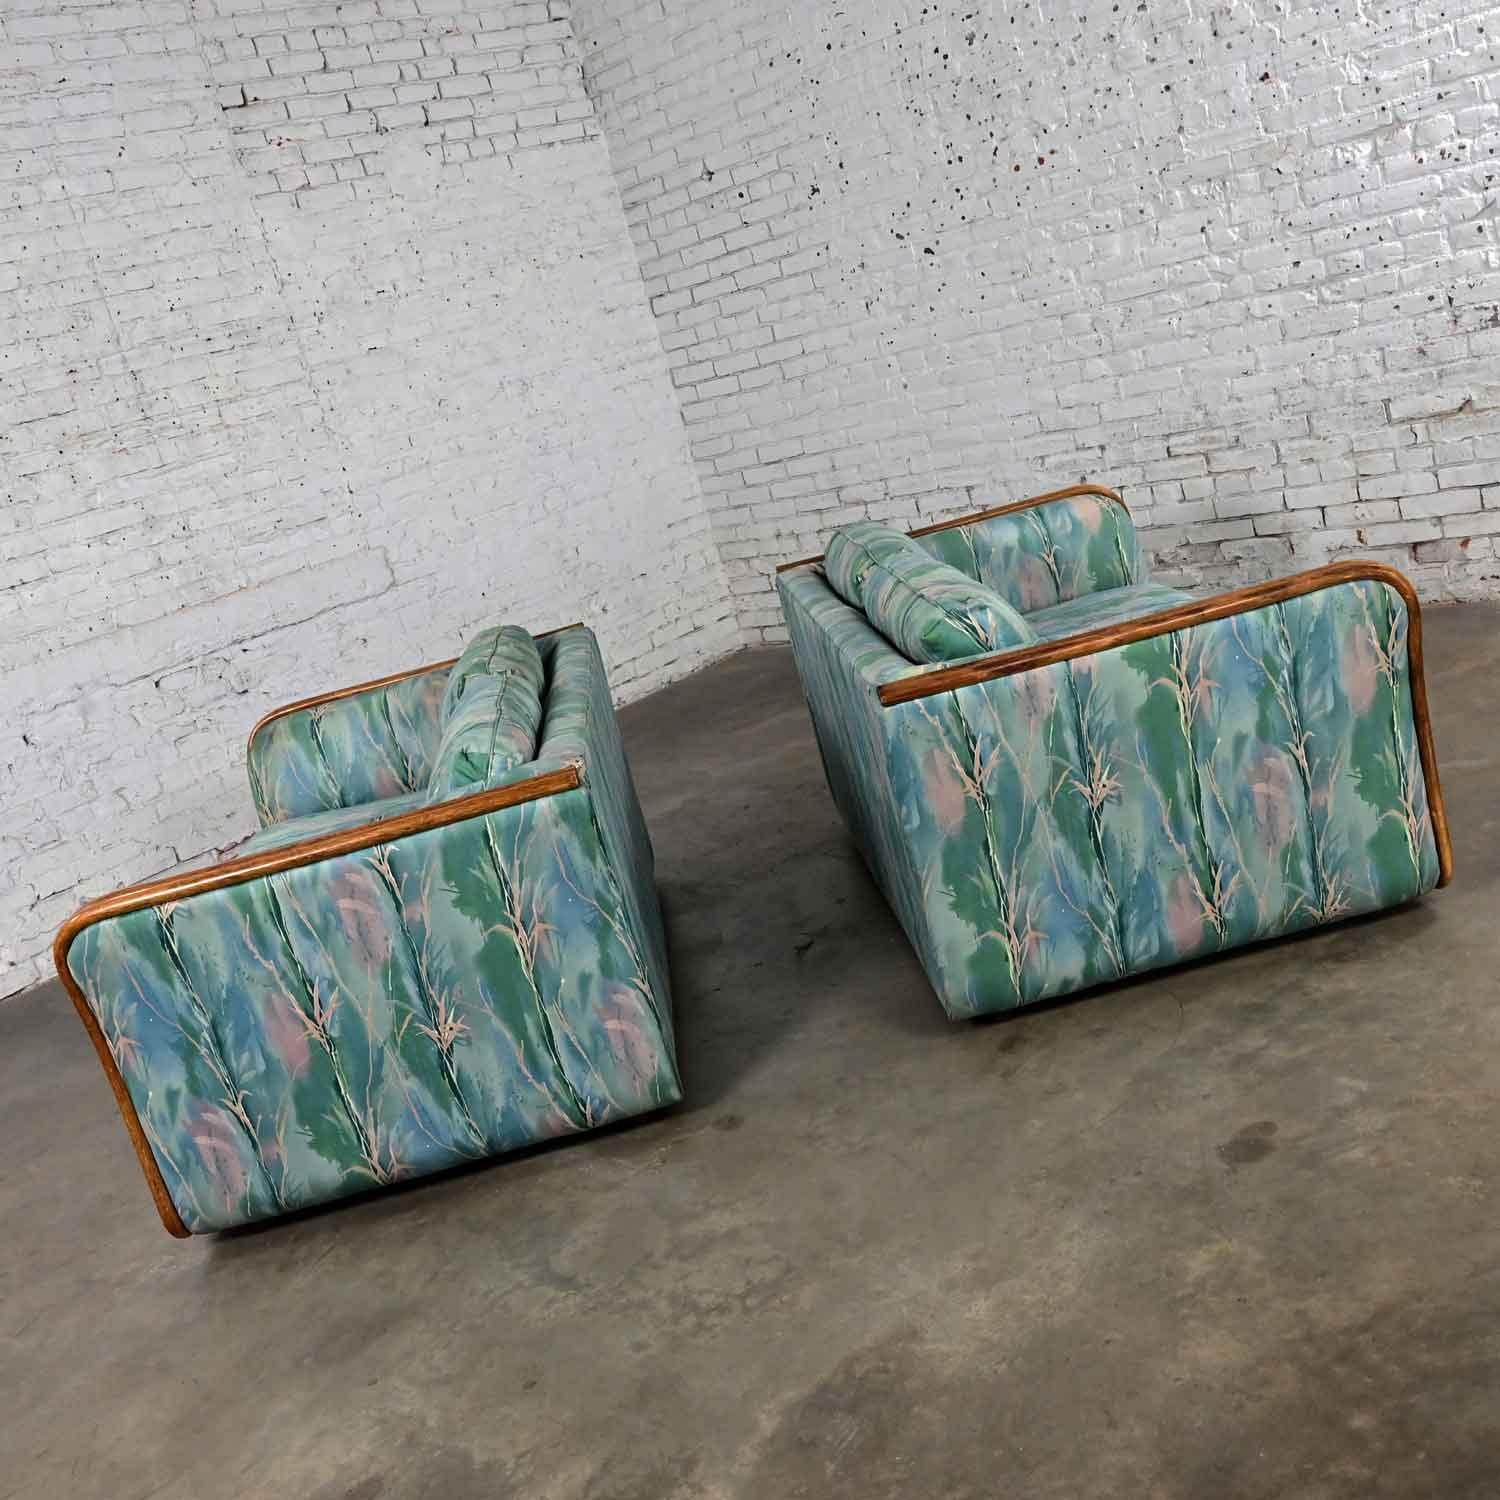 Late 20th Century Boho Chic Rattan & Wicker Tuxedo Style Upholstered Loveseats In Good Condition For Sale In Topeka, KS